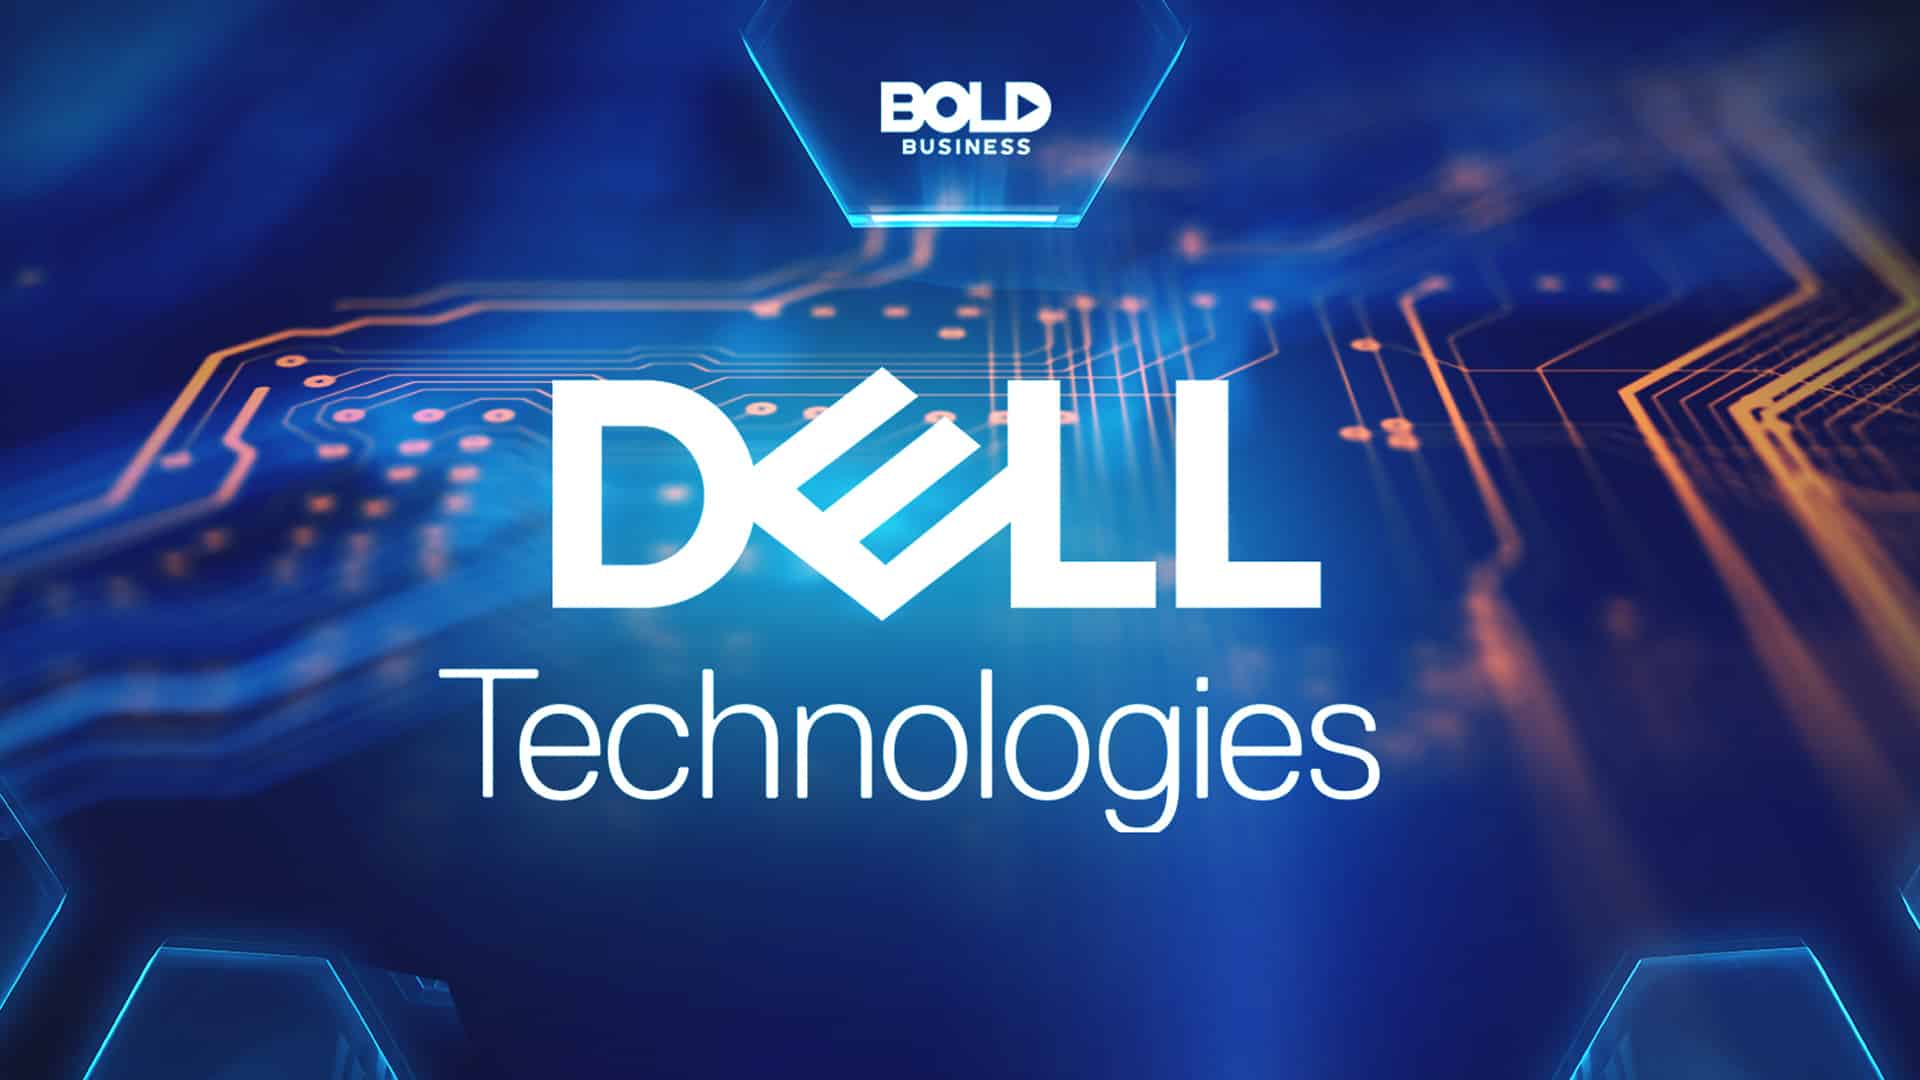 Dell Technologies, American India Foundation and NSDC Collaborate to Launch Project Future Ready, Aiming to Impact 100,000 Students